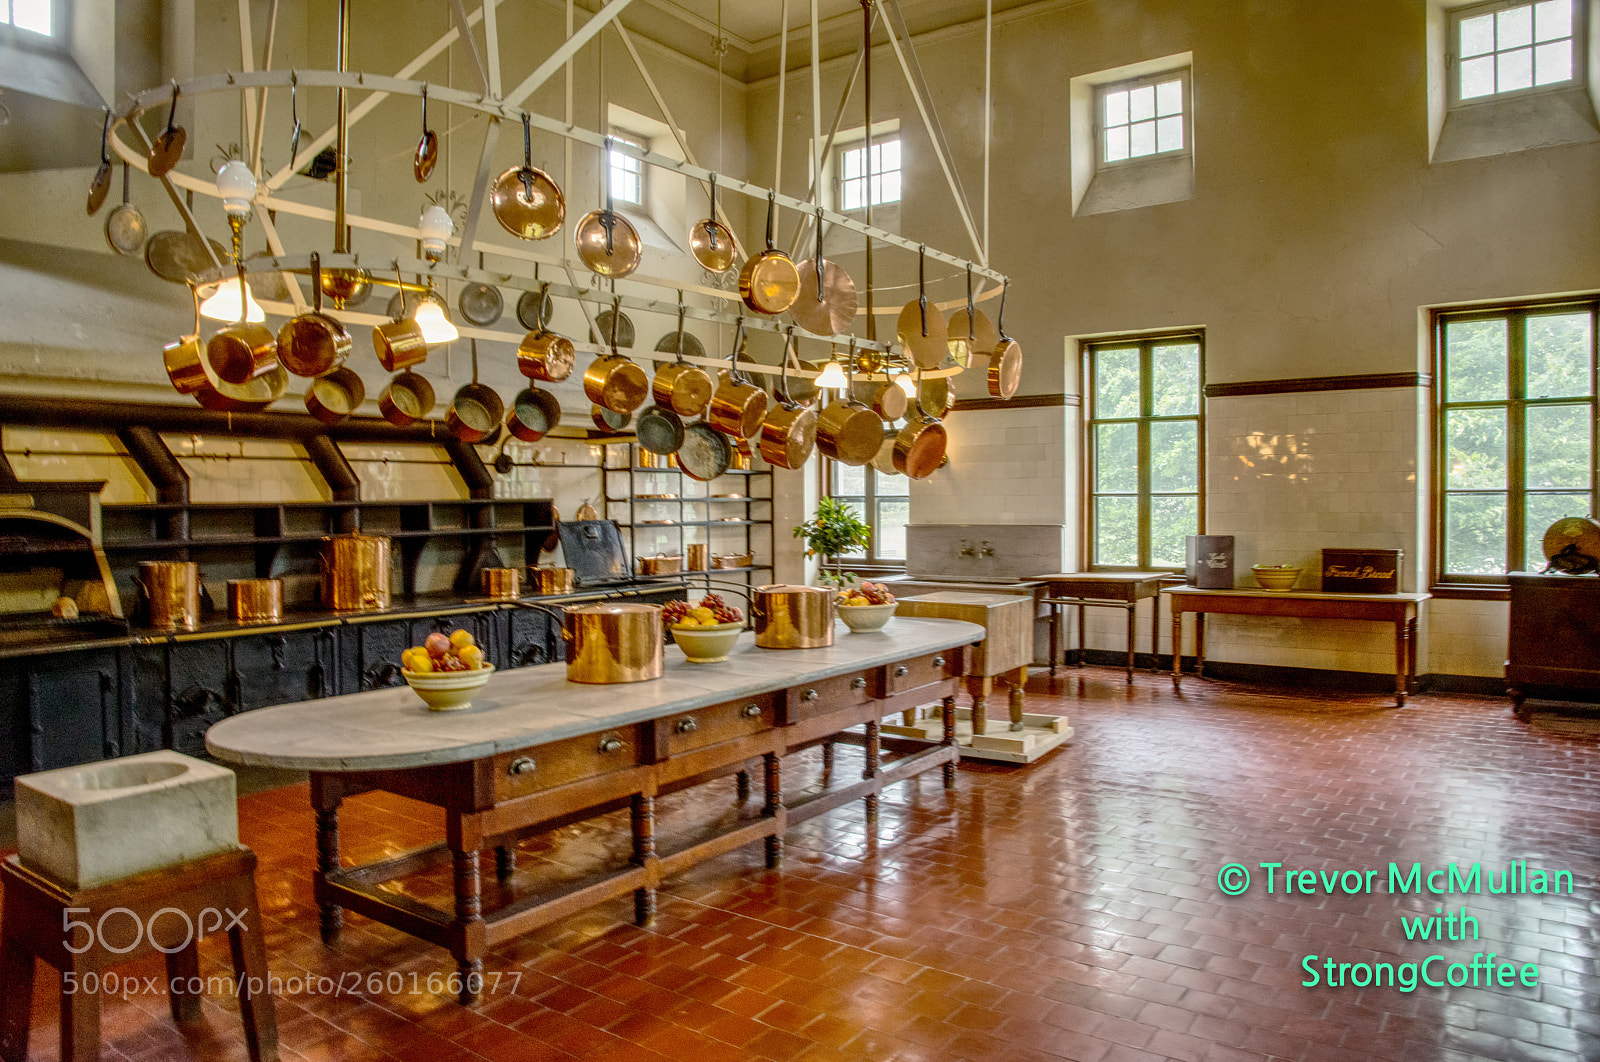 Nikon D800 sample photo. The breakers kitchen in photography